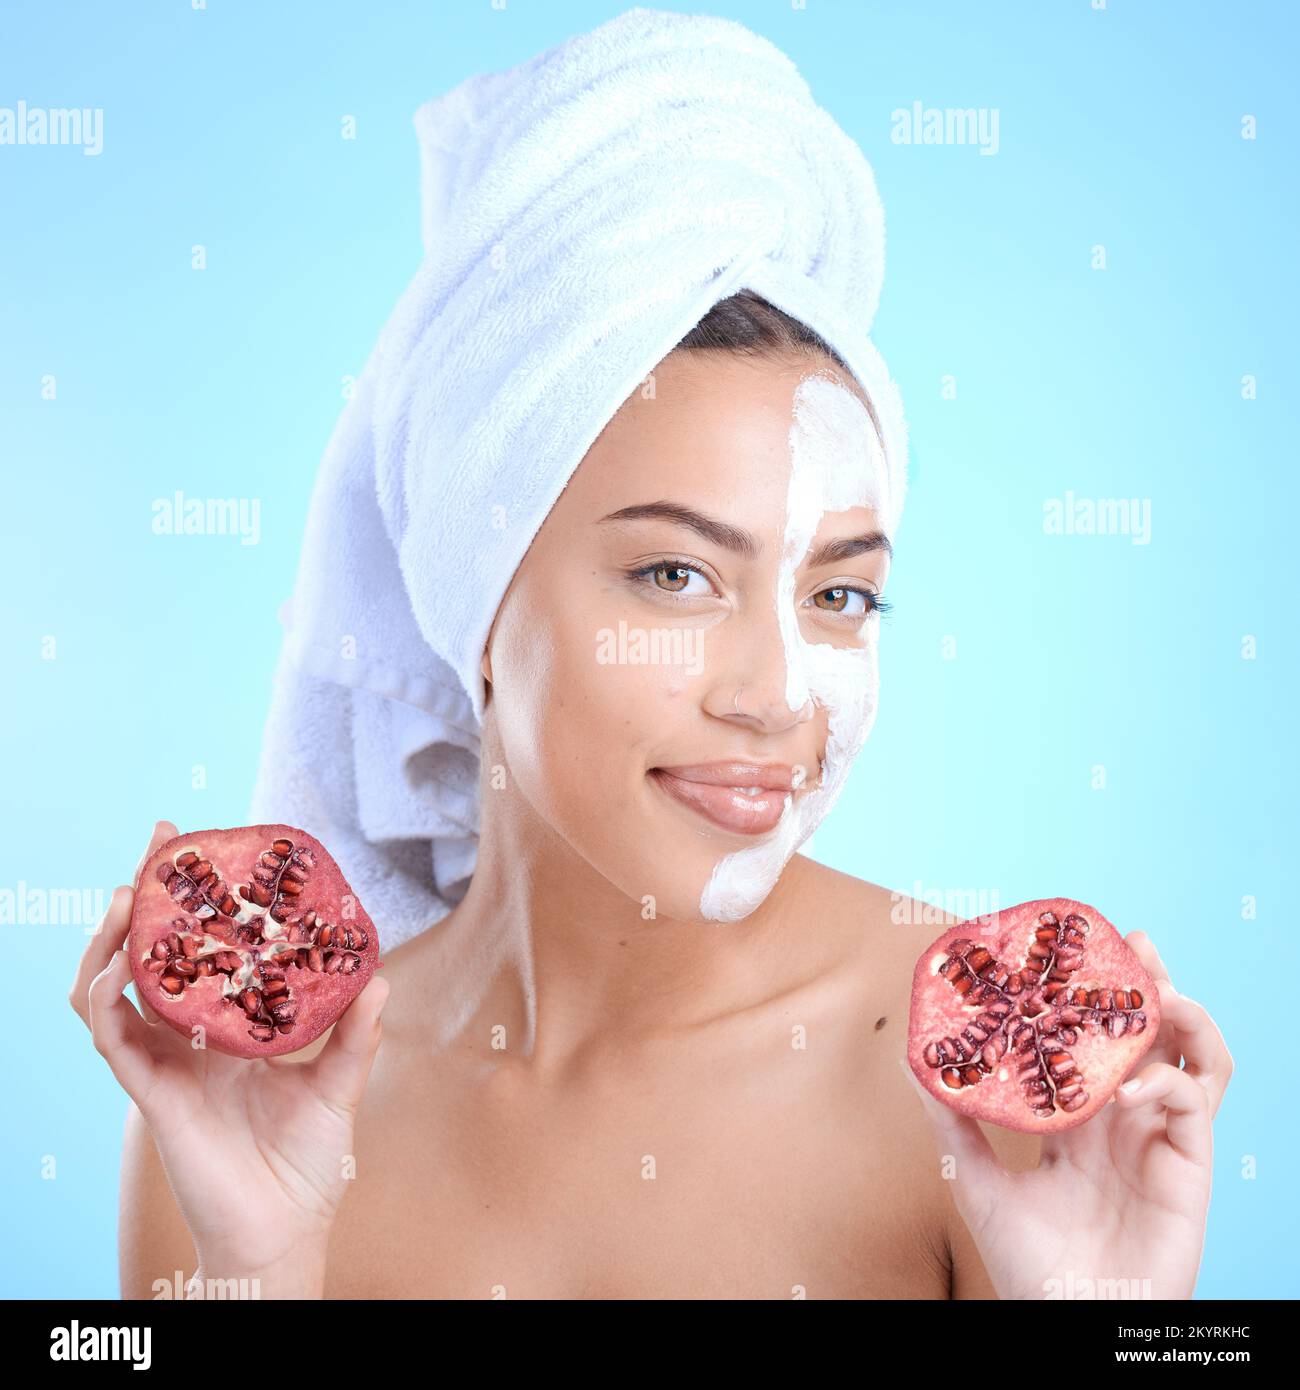 Beauty cream, face and woman with pomegranate, skincare and vitamin c for health, wellness and towel after shower in blue studio background. Model Stock Photo